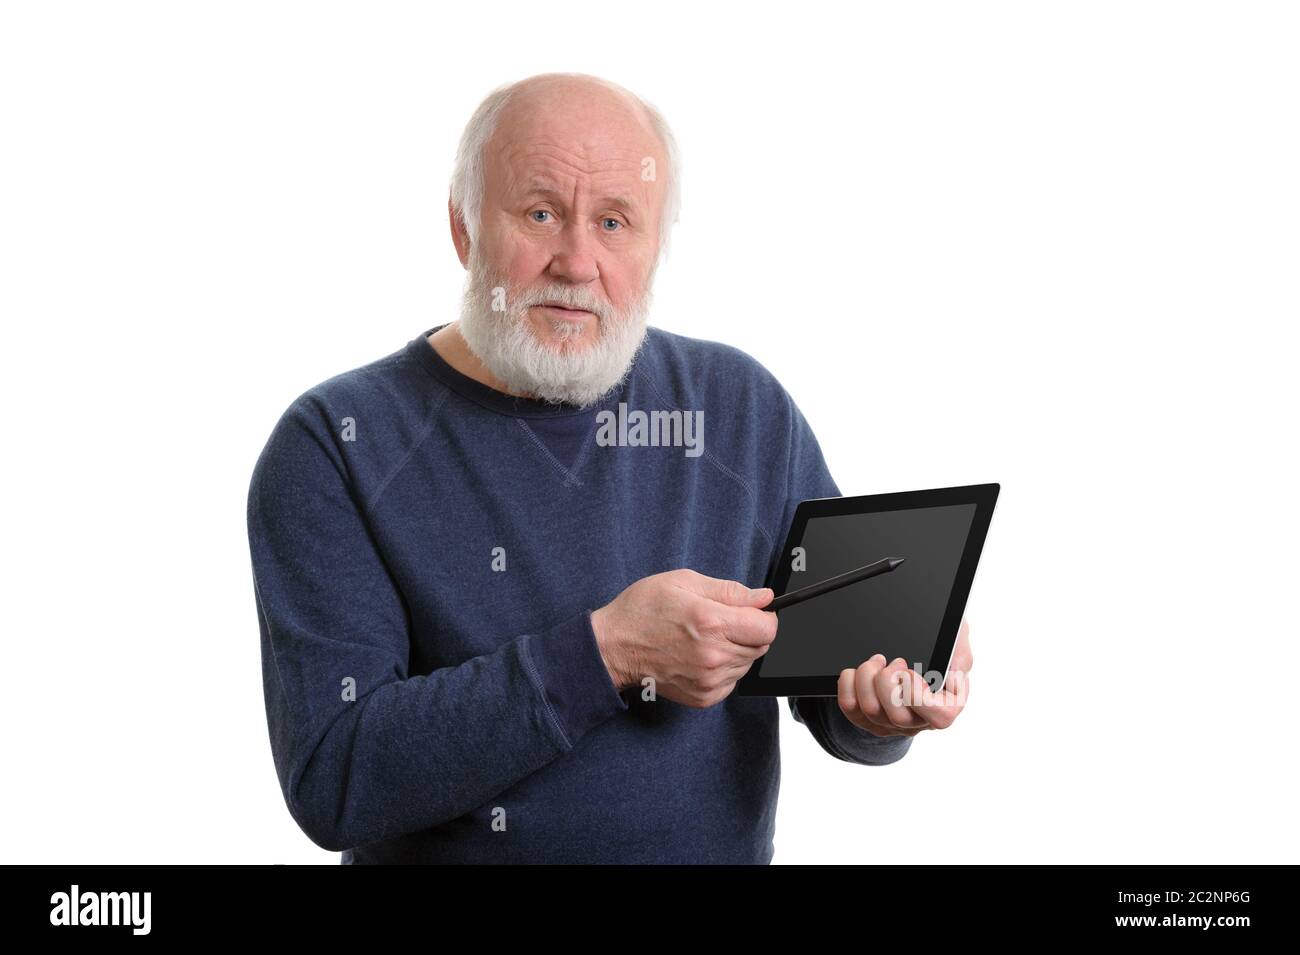 Funny old man using tablet computer isolated on white Banque D'Images